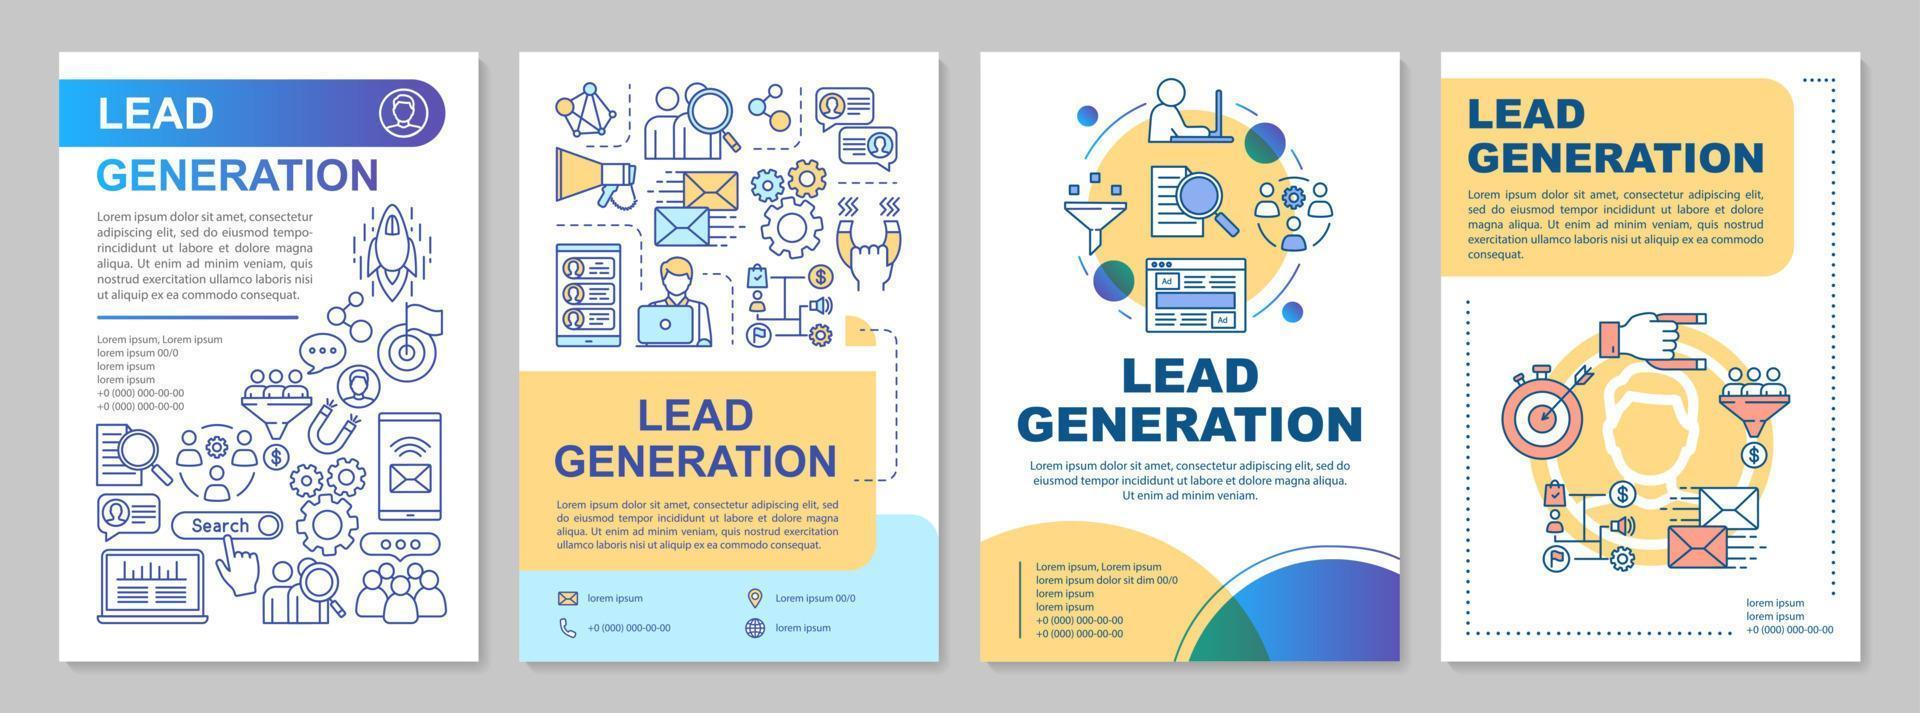 Lead generation brochure template layout. Digital marketing, SMM. Flyer, booklet, leaflet print design with linear illustrations. Vector page layouts for magazines, annual reports, advertising posters